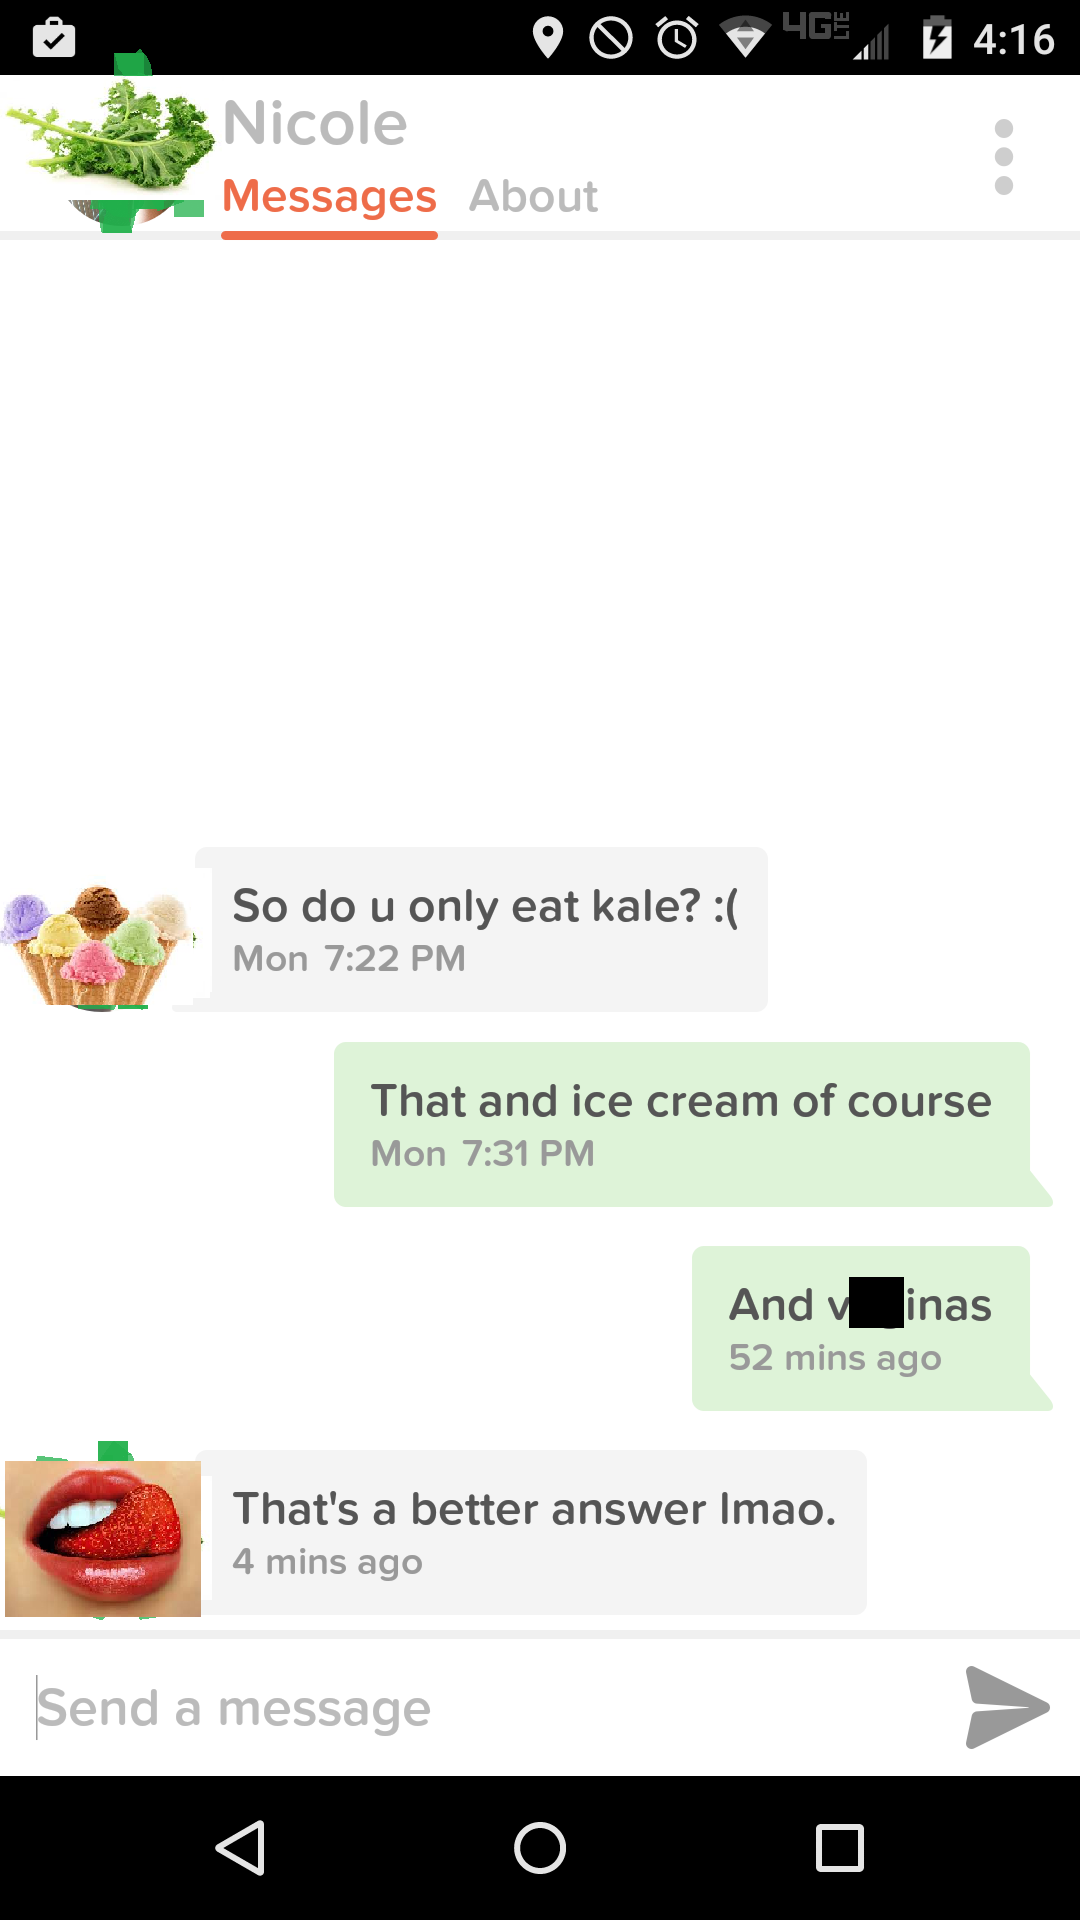 tinder - most clever pick up lines - 9 0 7 Hp la Nicole Messages About So do u only eat kale? Mon That and ice cream of course Mon And v inas 52 mins ago That's a better answer Imao. 4 mins ago Send a message 0 0